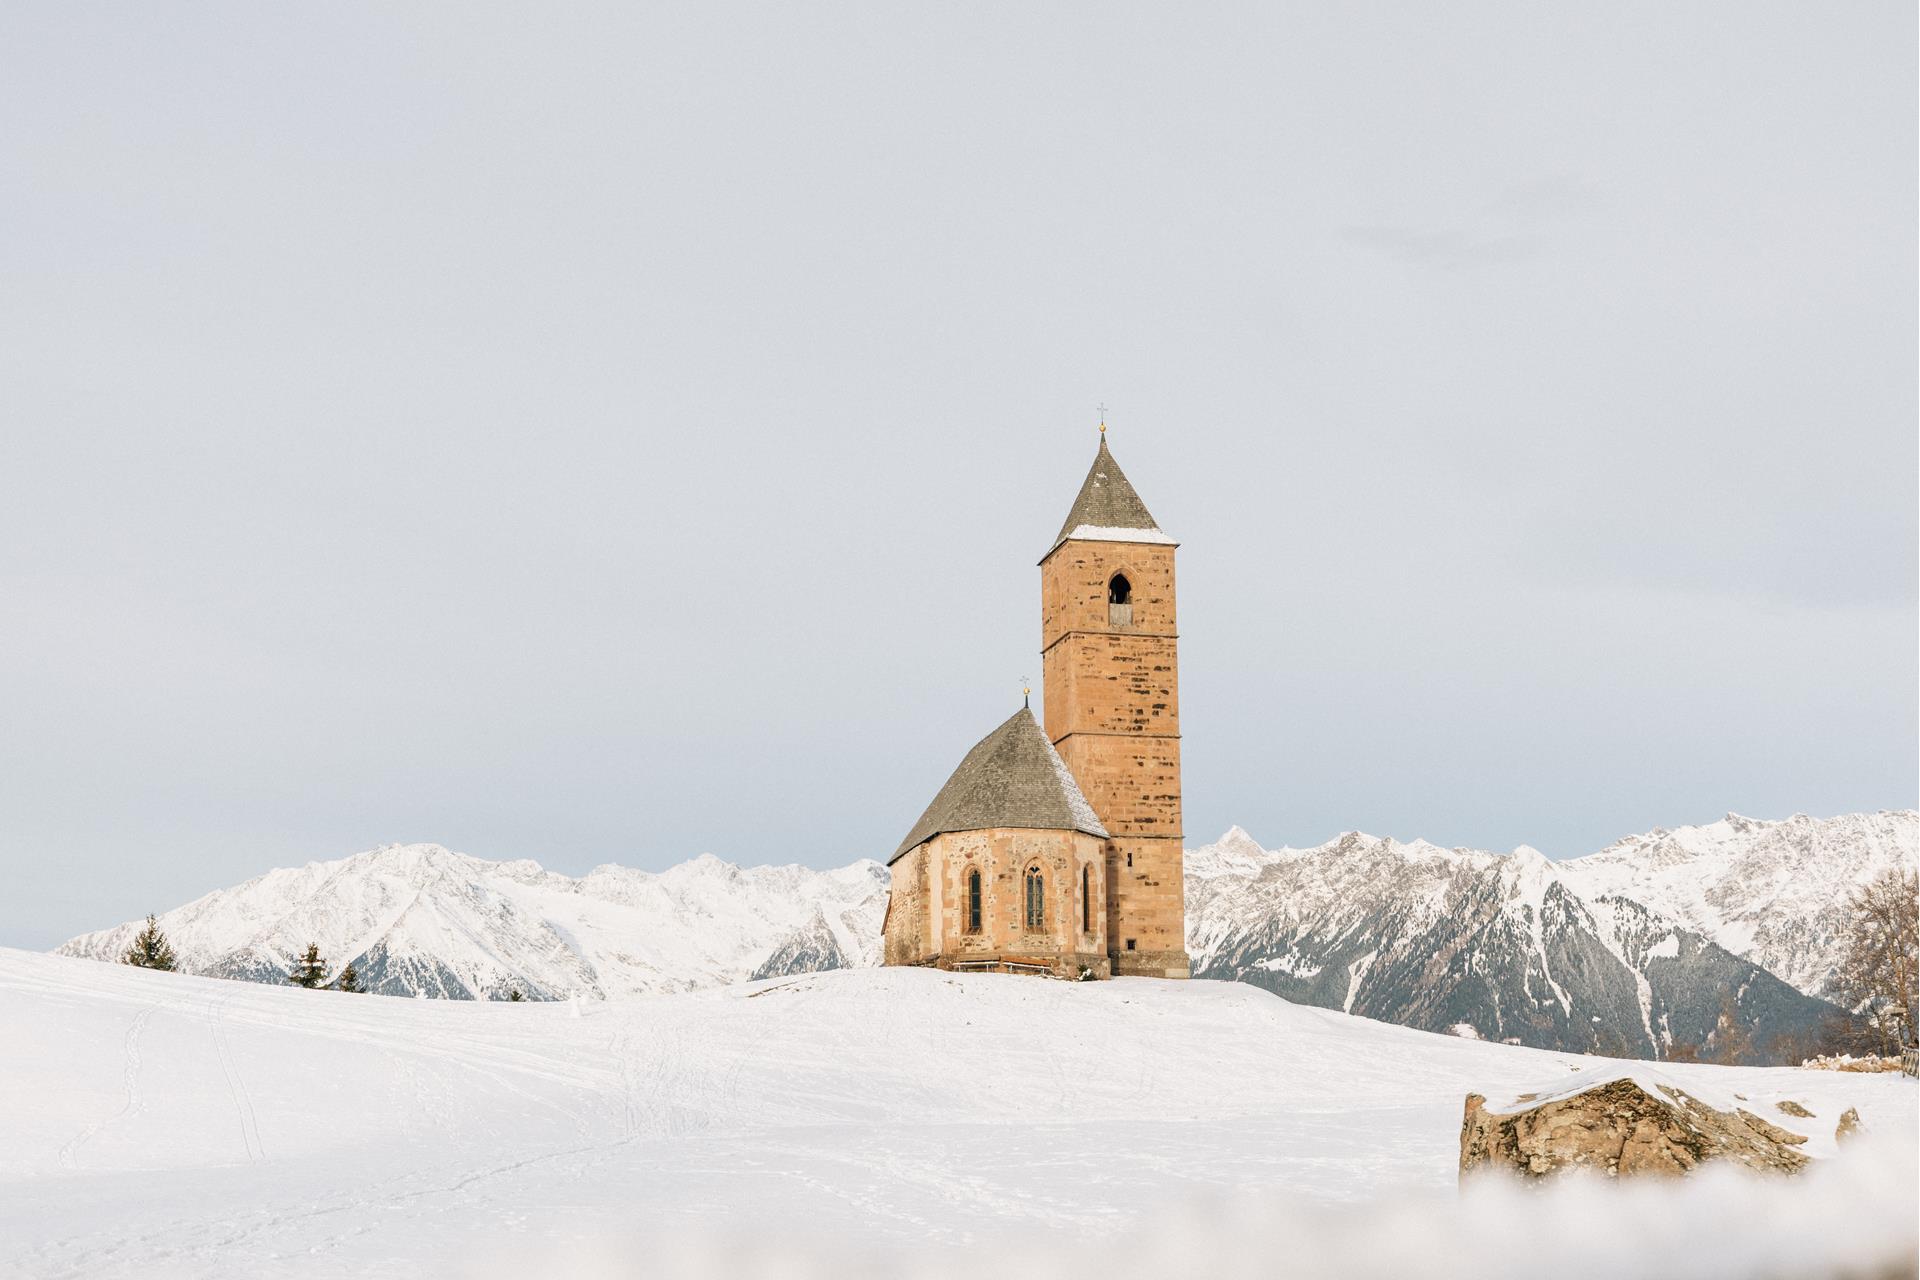 The St. Kathrein church in the Scharte in Hafling surrounded by fresh powder snow. In the background the white mountain peaks in winter. The striking stone in front of the church.